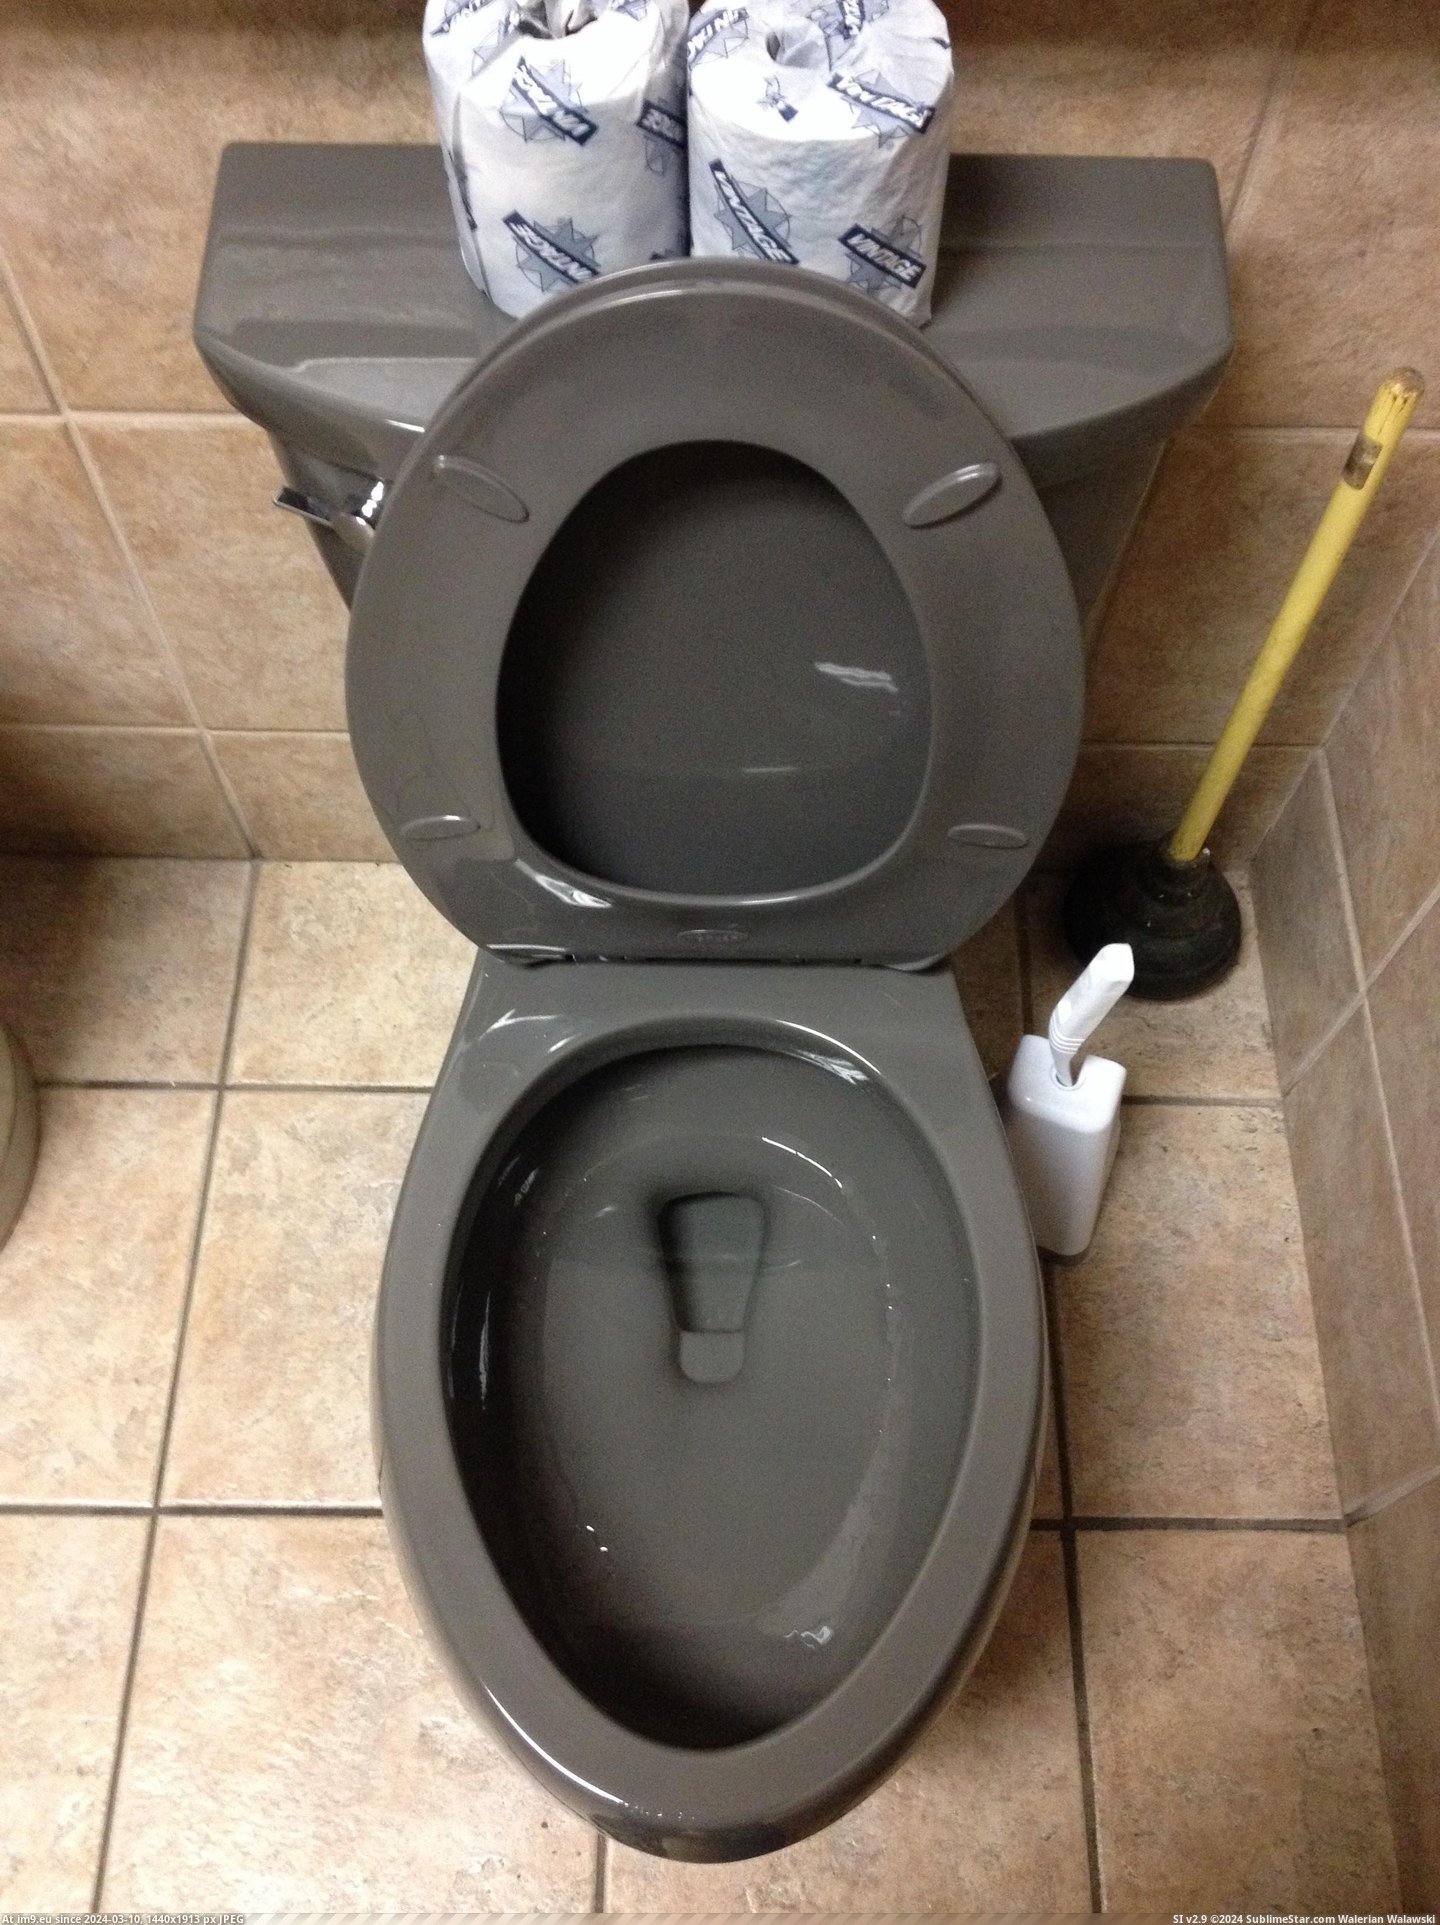 #Black #White #Toilet #Gray #Urinal #All #Bathroom [Mildlyinteresting] The toilet and urinal in the bathroom were all gray rather than just white or white and black 2 Pic. (Bild von album My r/MILDLYINTERESTING favs))